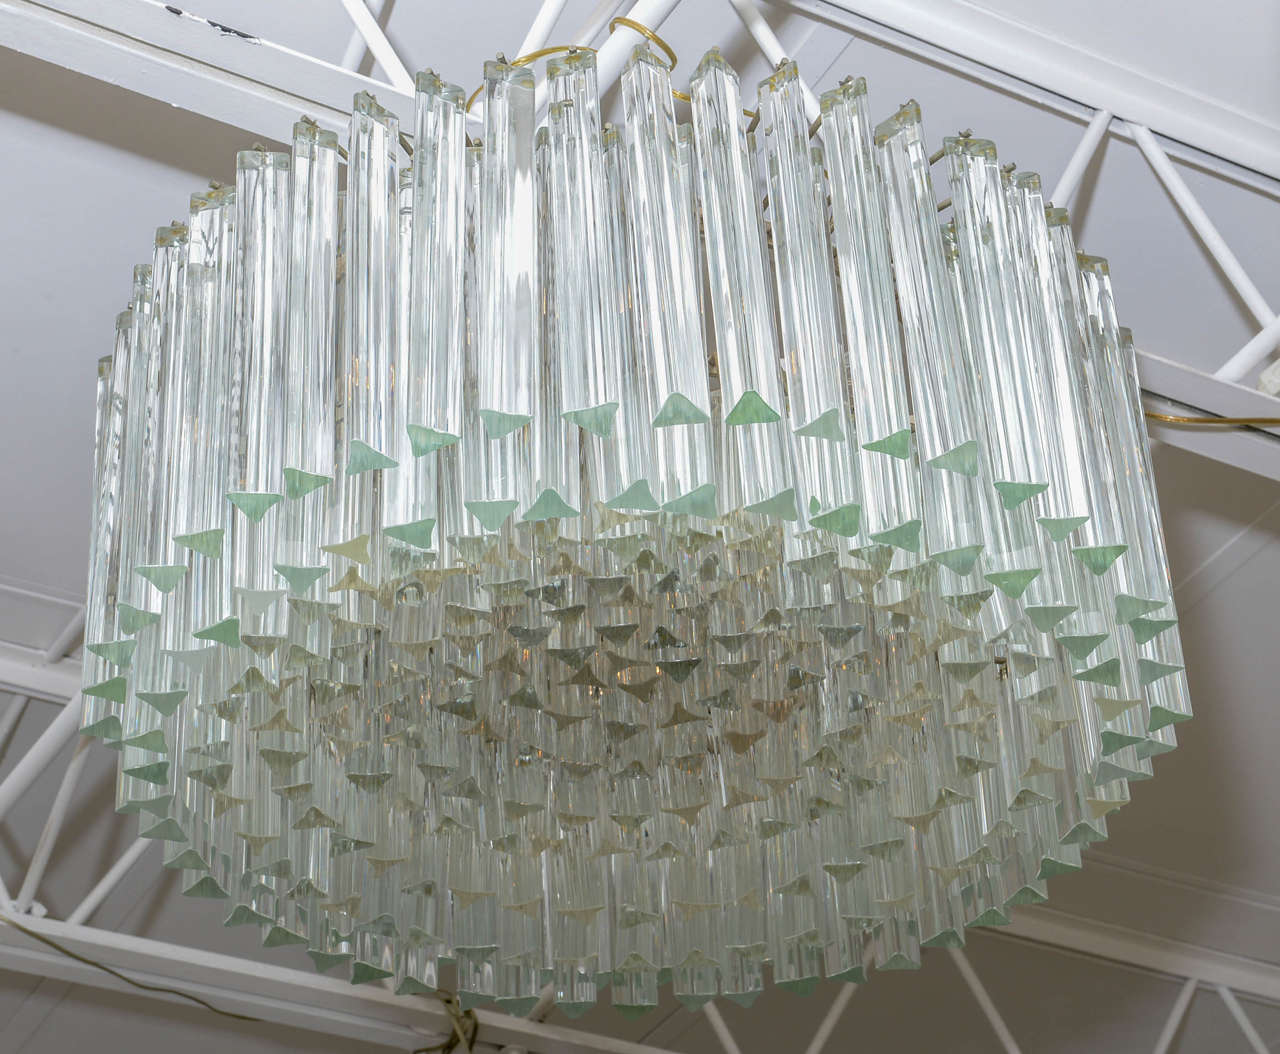 Camer chandelier with nine tiers of triedri prisms.